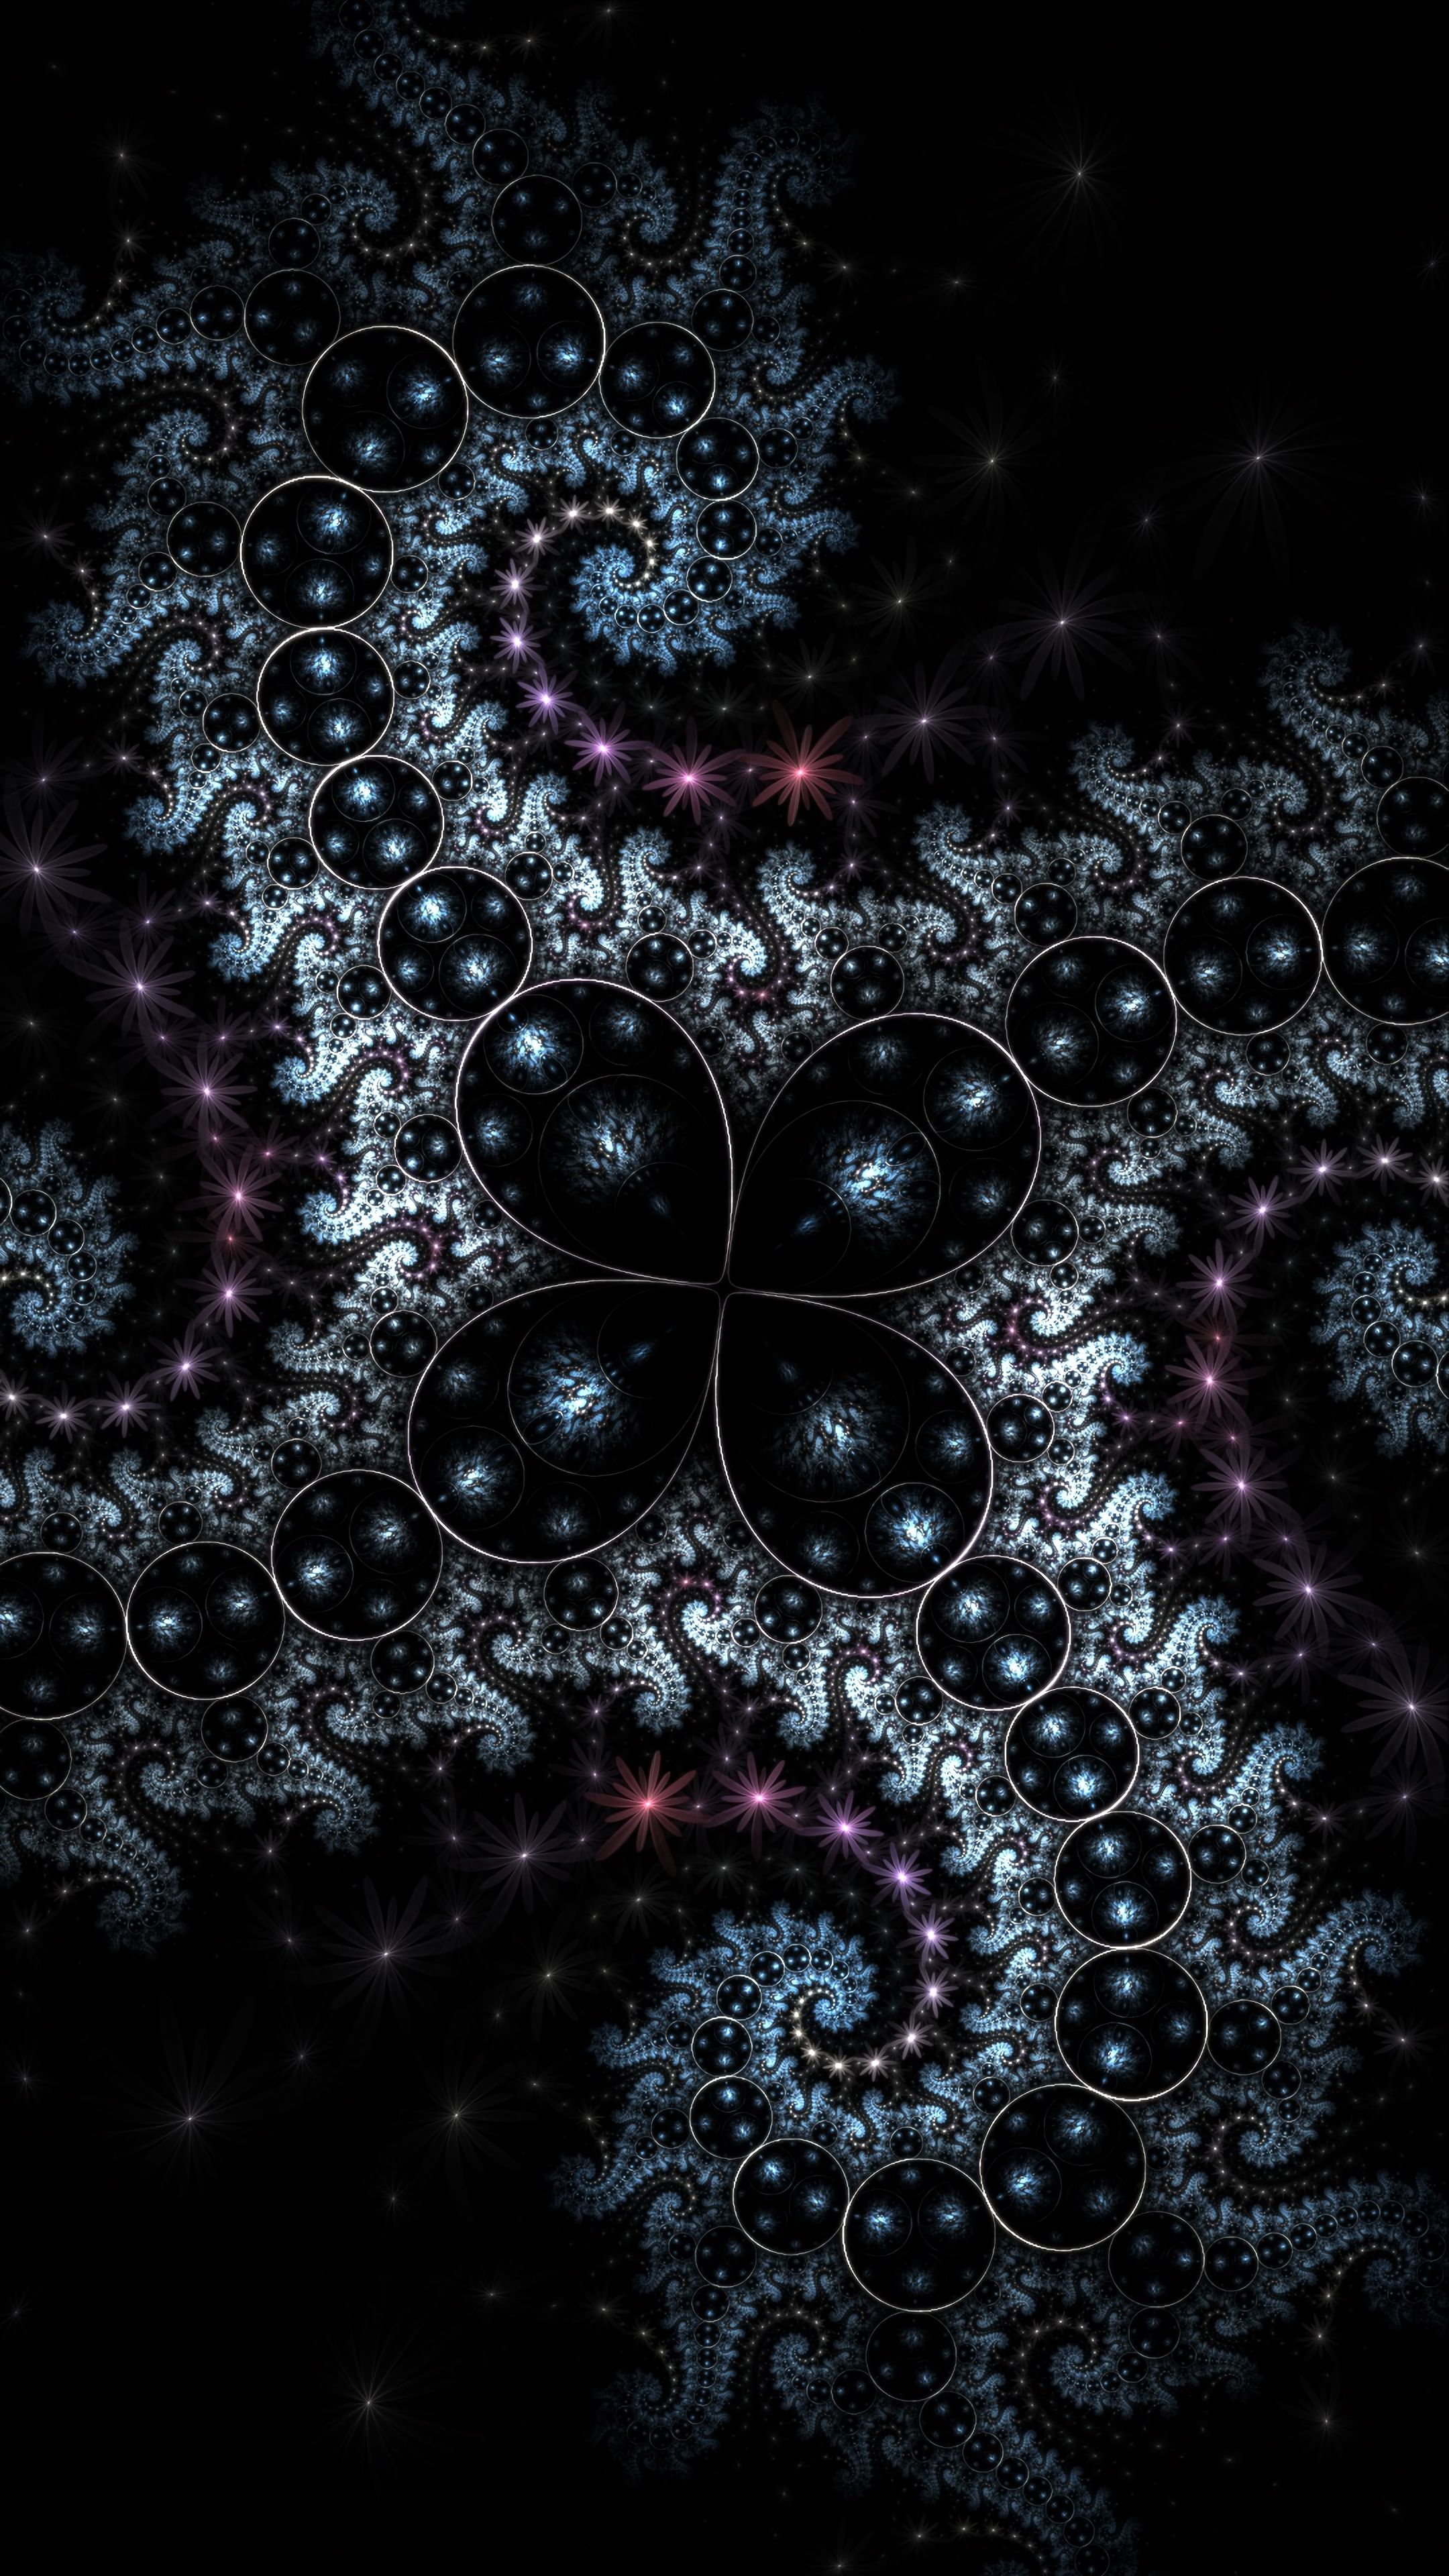 forms, abstract, dark, circles, form, fractal, spiral images